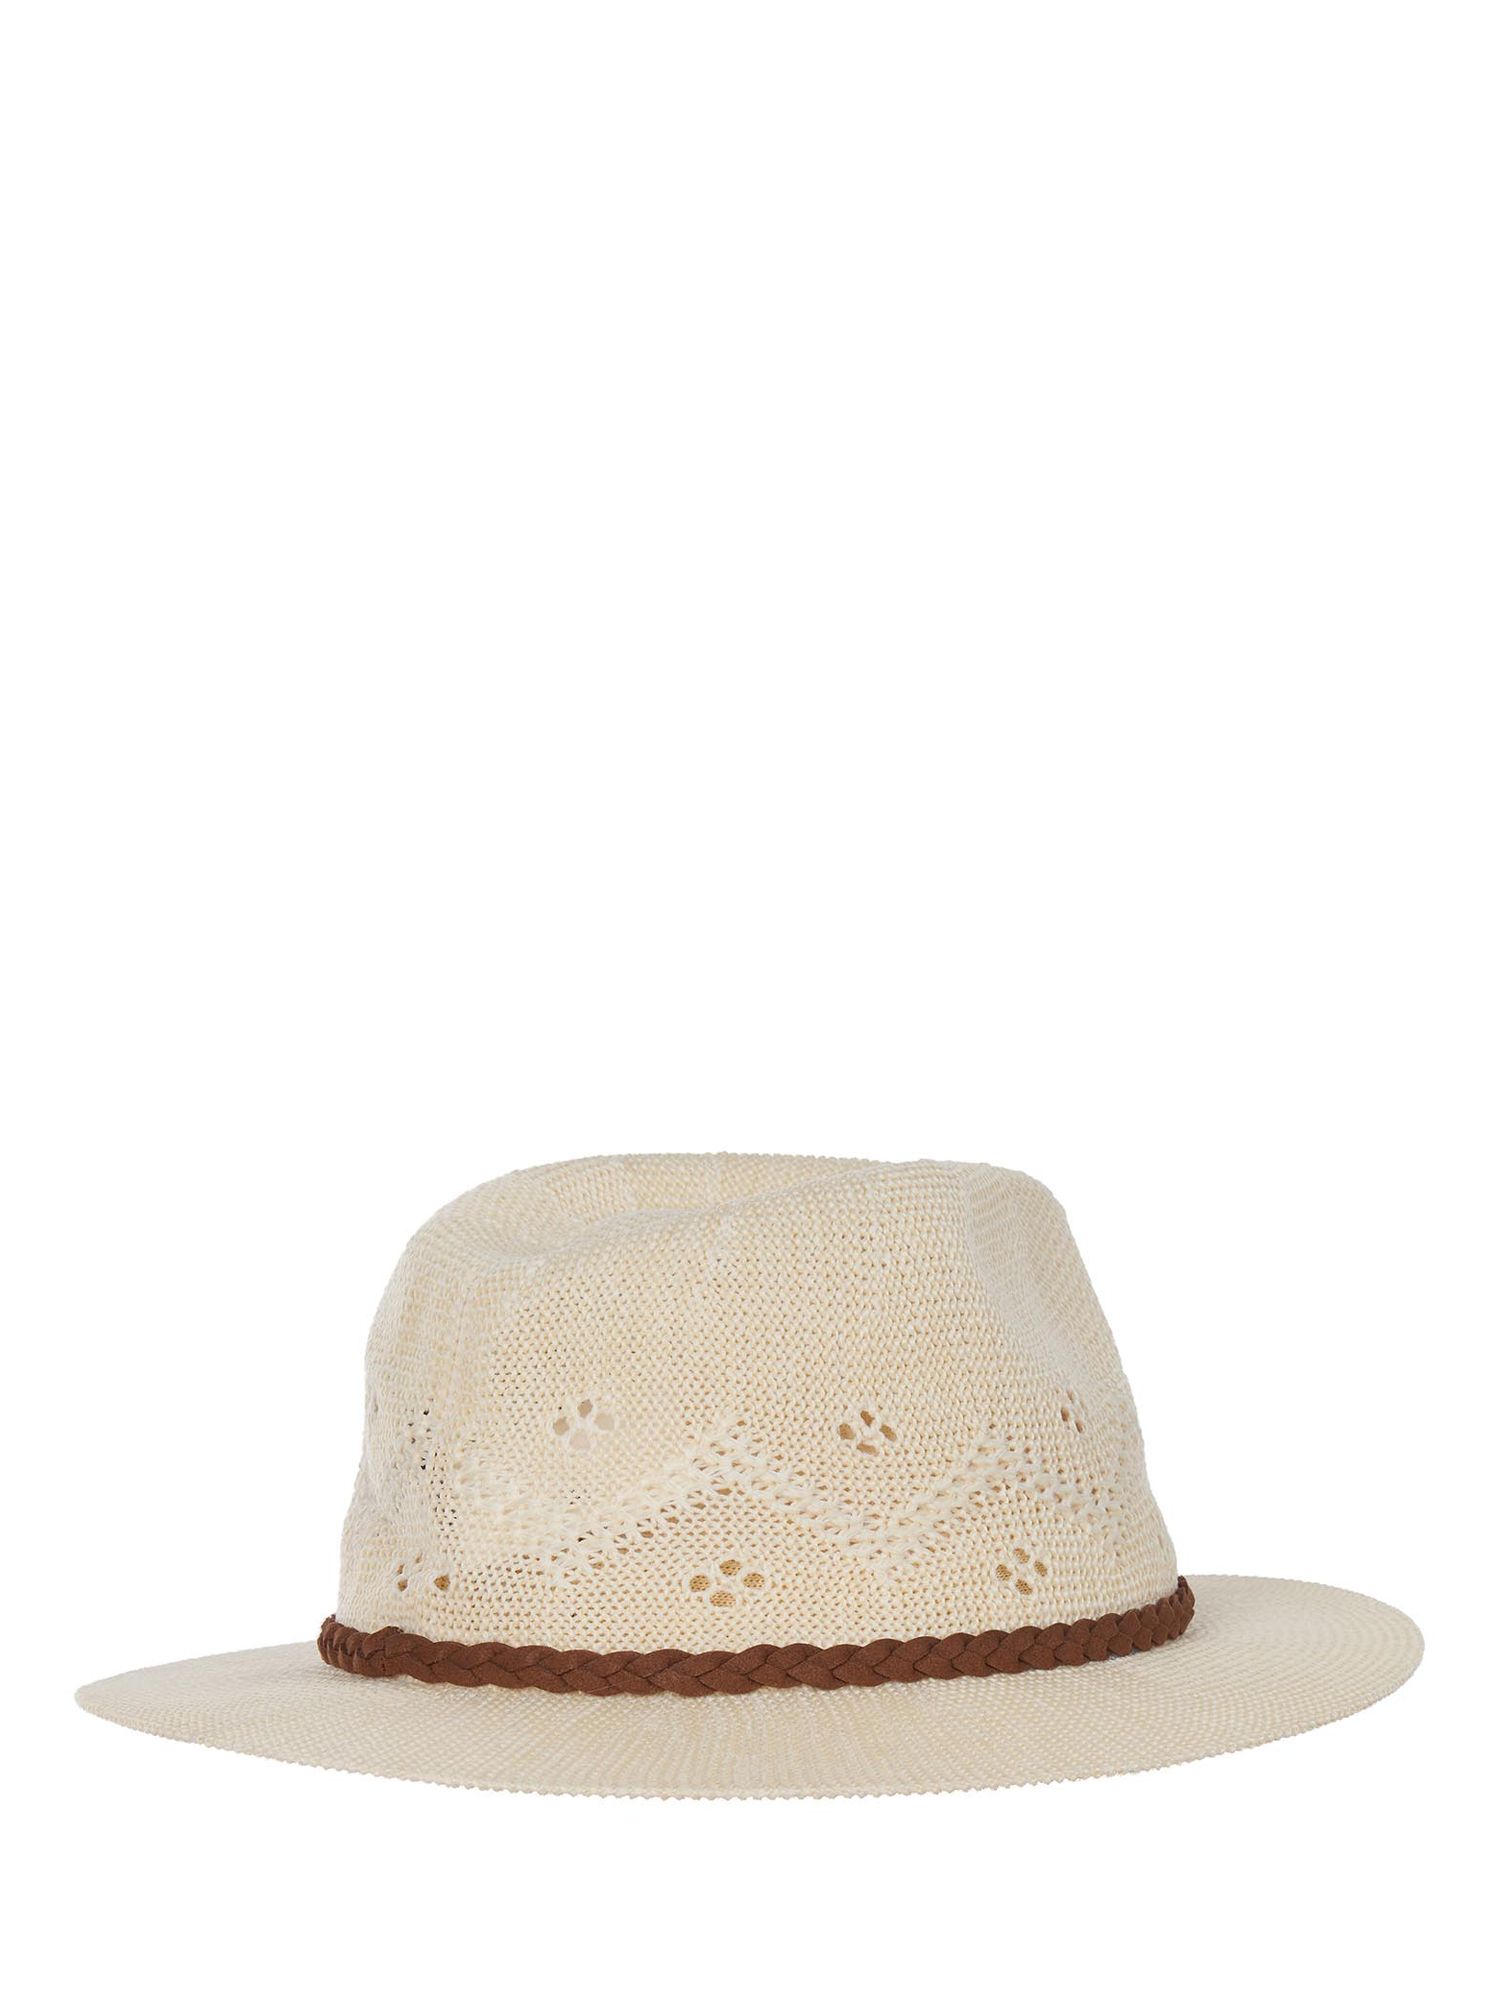 Barbour Flowerdale Trilby Hat, Ivory, S